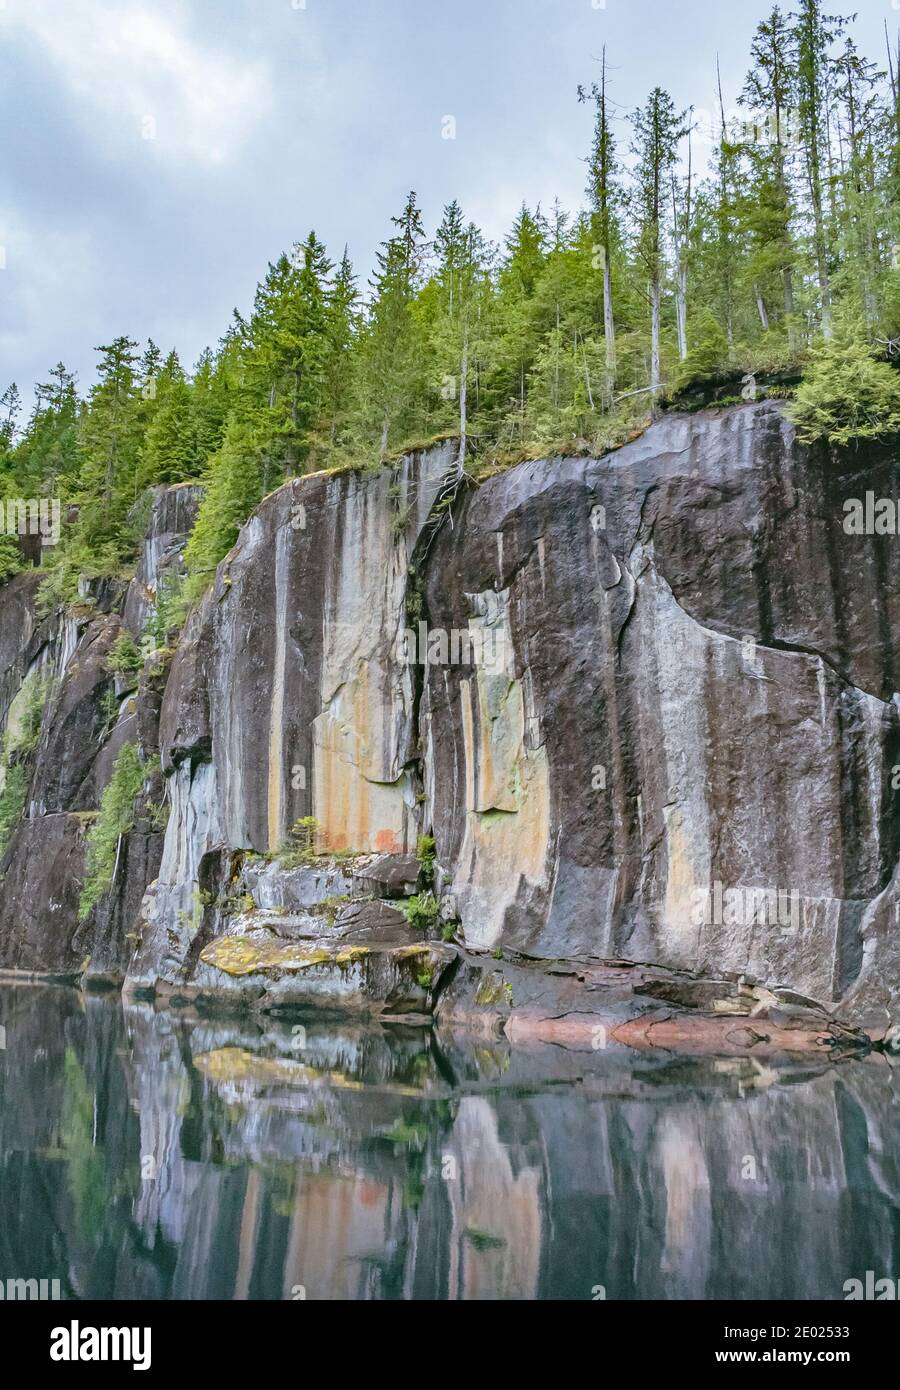 Topped by dense forest, steep vertical cliffs are reflected in the still water below. A faded pictograph is visible (Alison Sound, British Columbia). Stock Photo